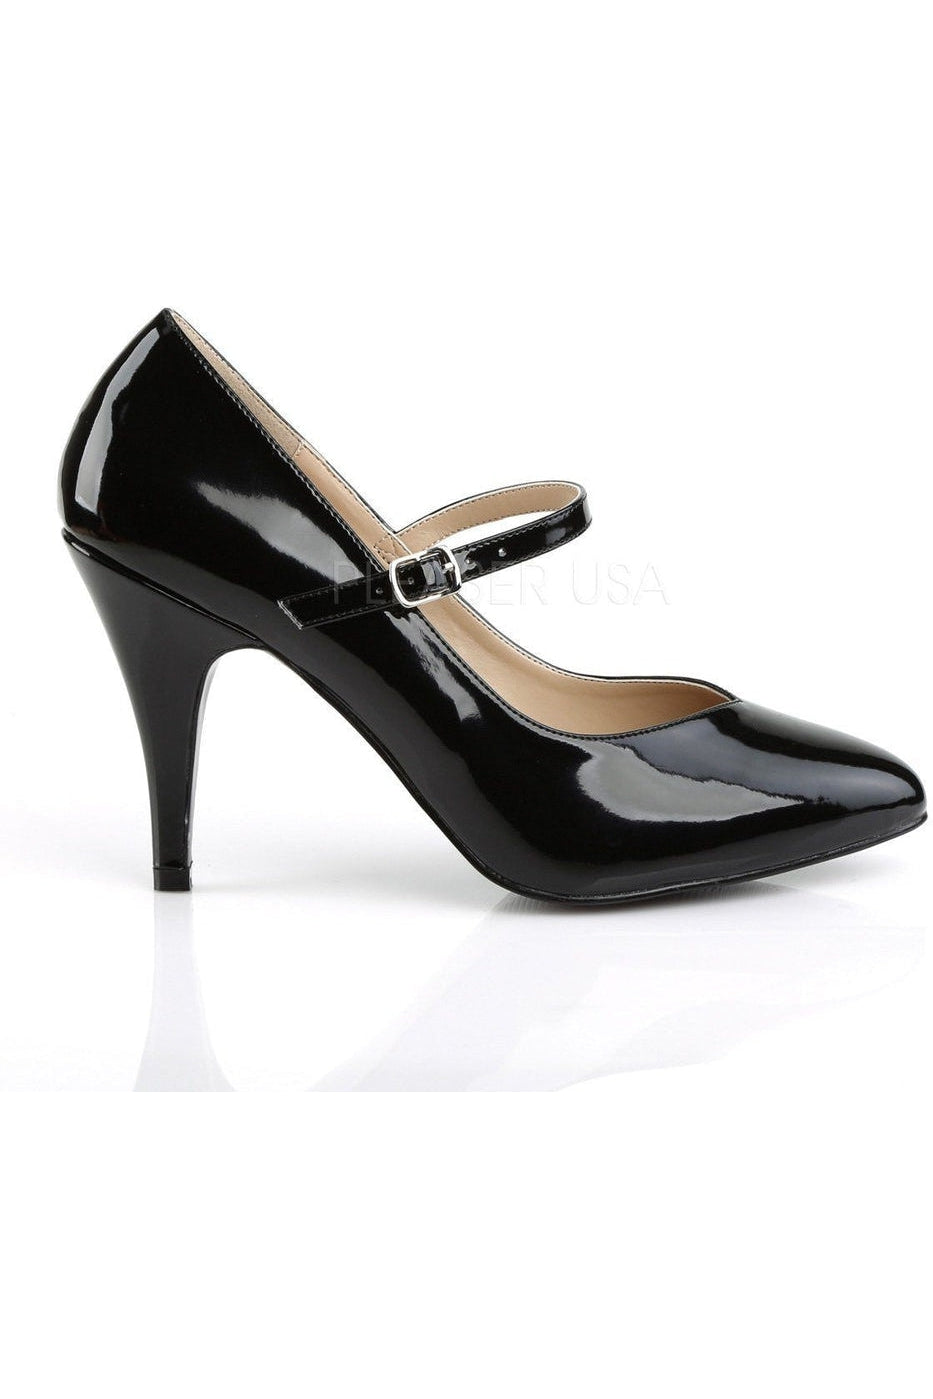 DREAM-428 Pump | Black Patent-Pleaser Pink Label-Mary Janes-SEXYSHOES.COM